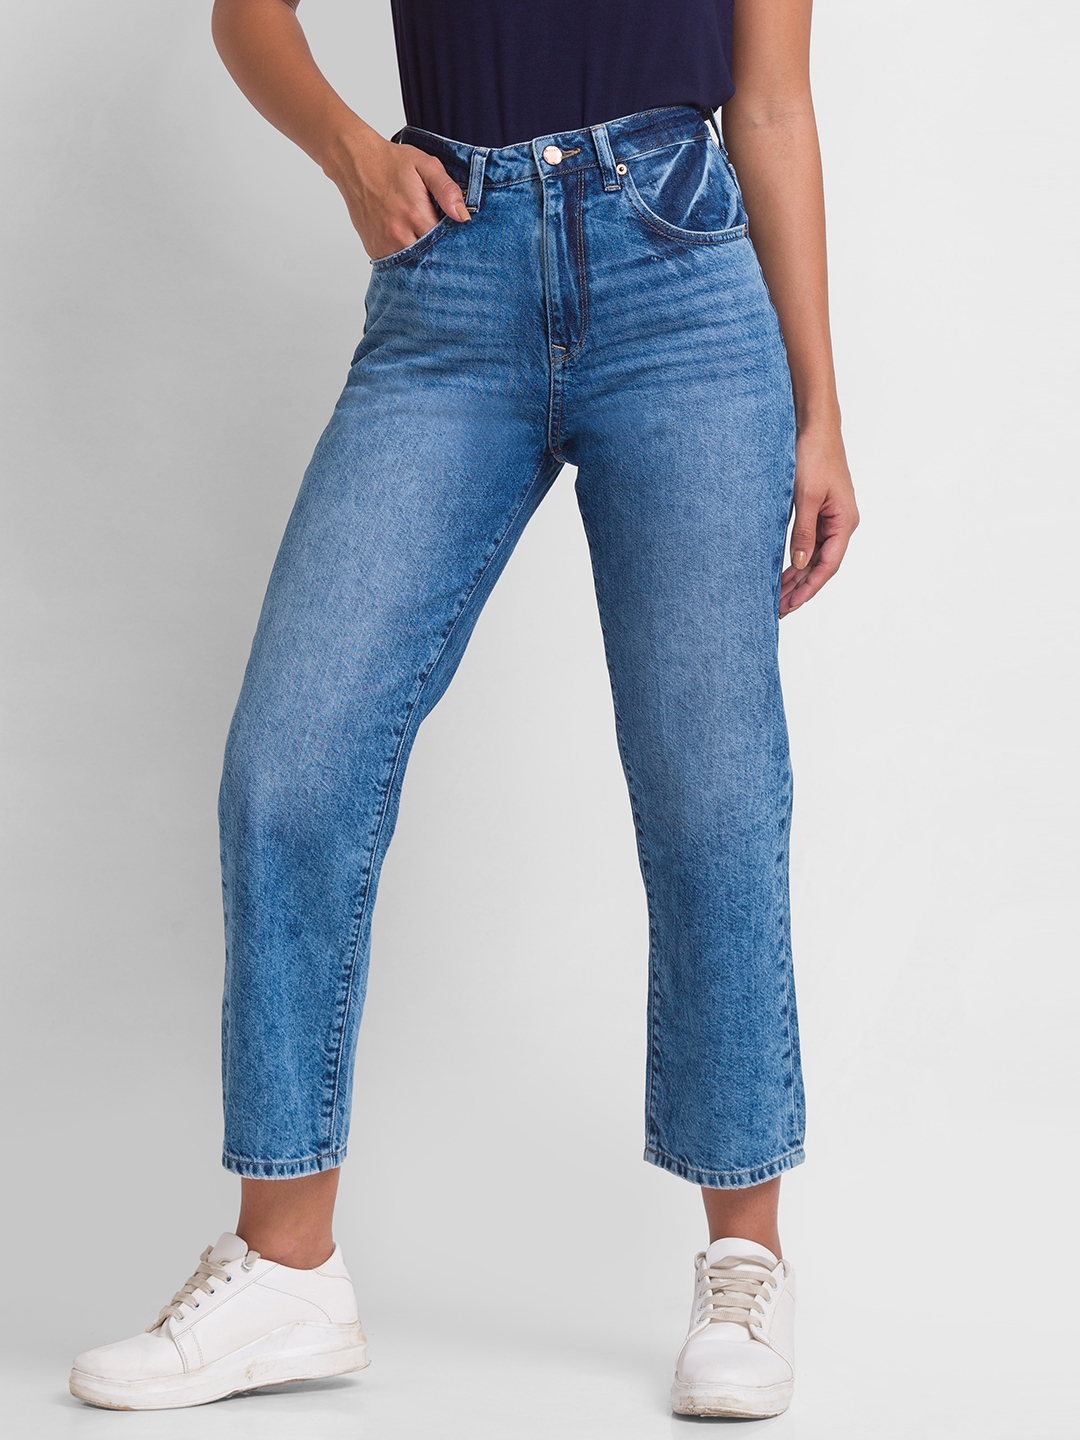 Women's Blue Cotton Solid Straight Jeans